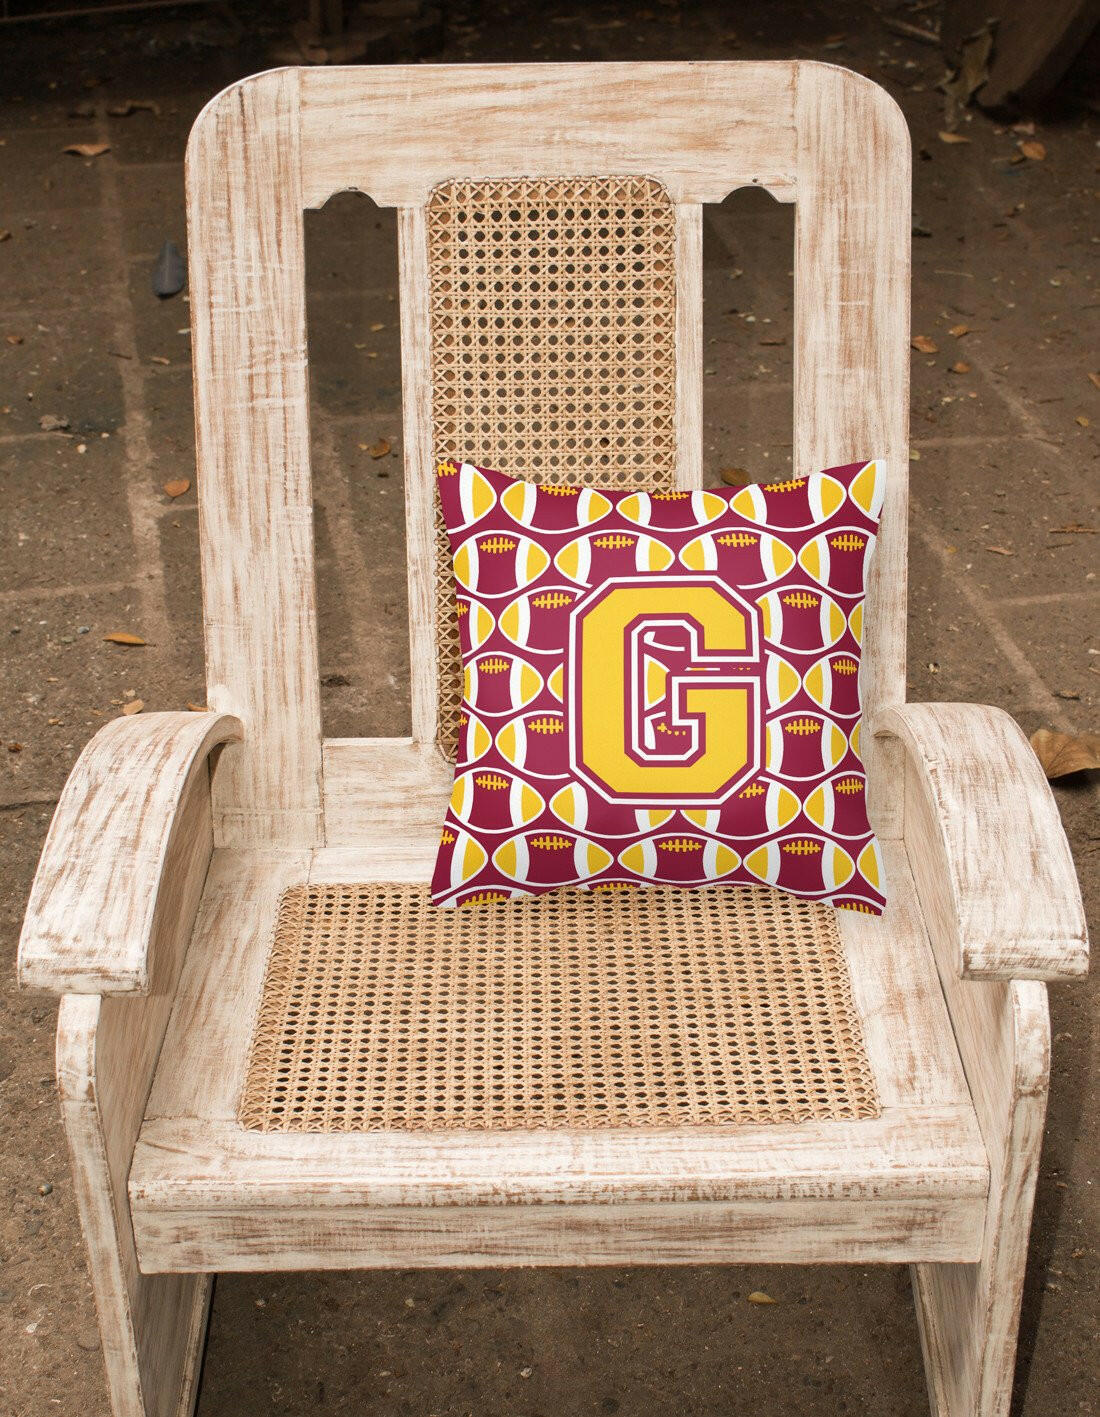 Letter G Football Maroon and Gold Fabric Decorative Pillow CJ1081-GPW1414 by Caroline's Treasures